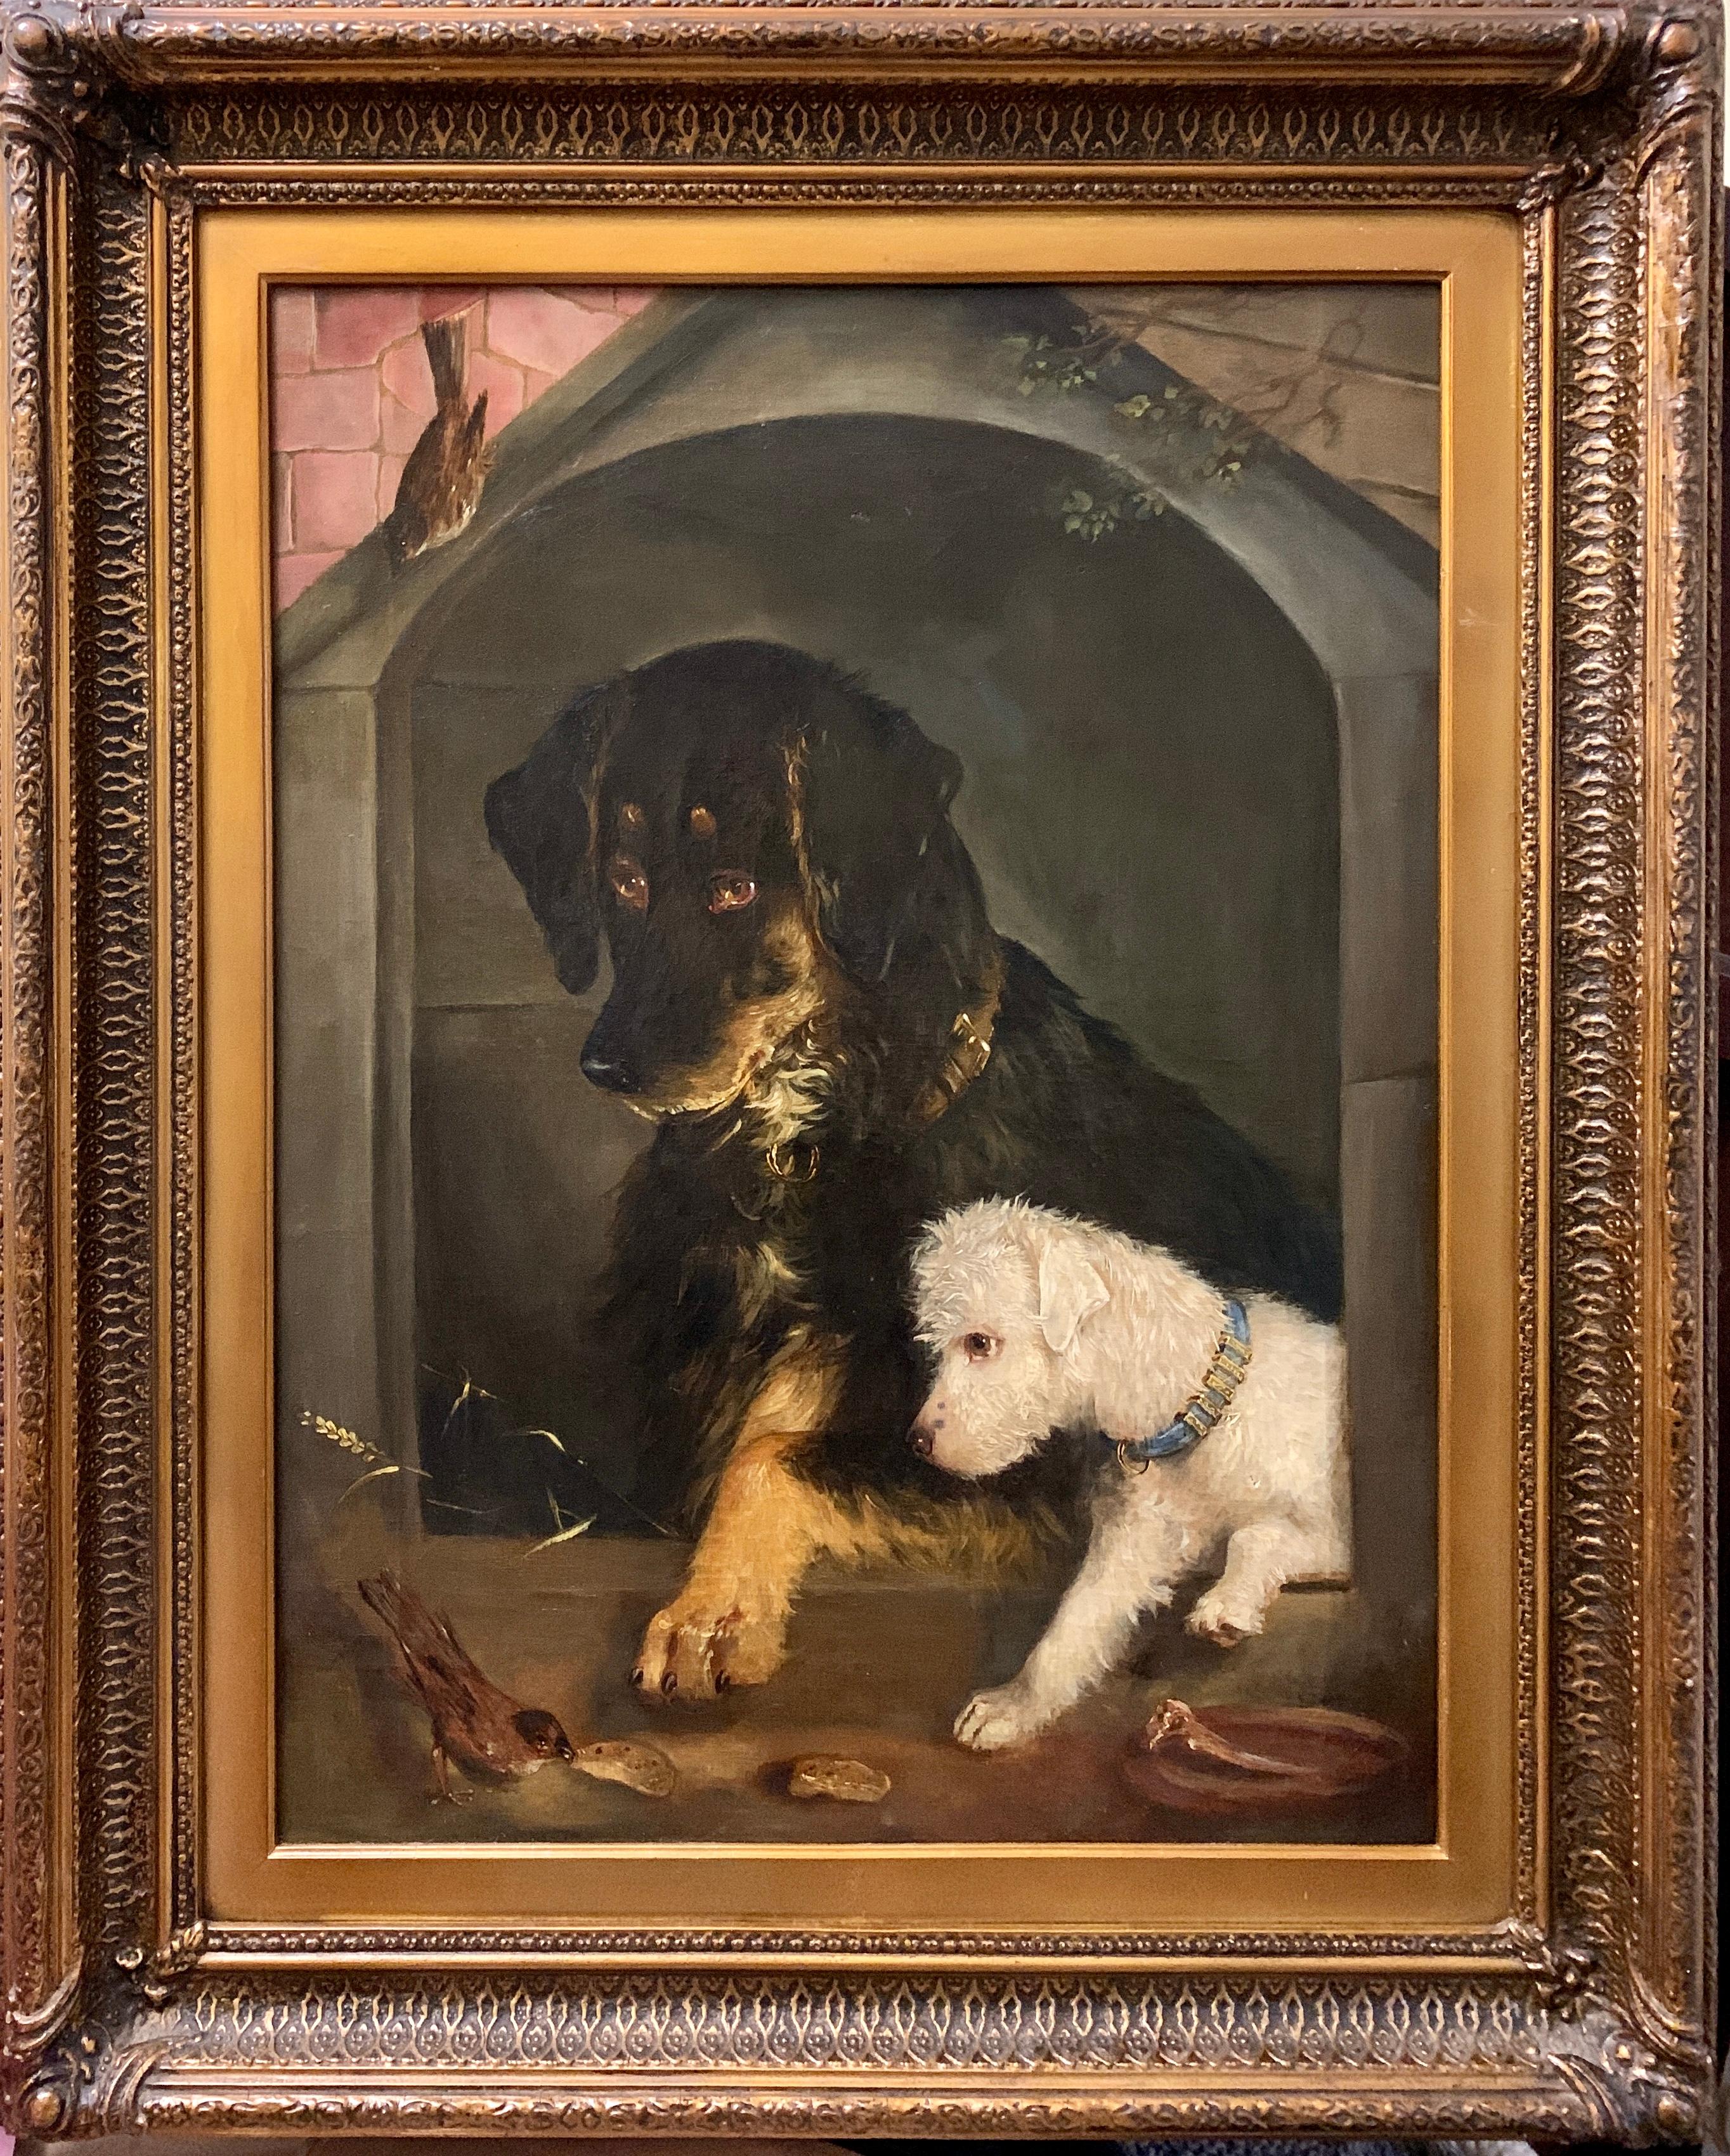 Just a Tit-Bit, English Victorian 19th century portrait of a dog and puppy